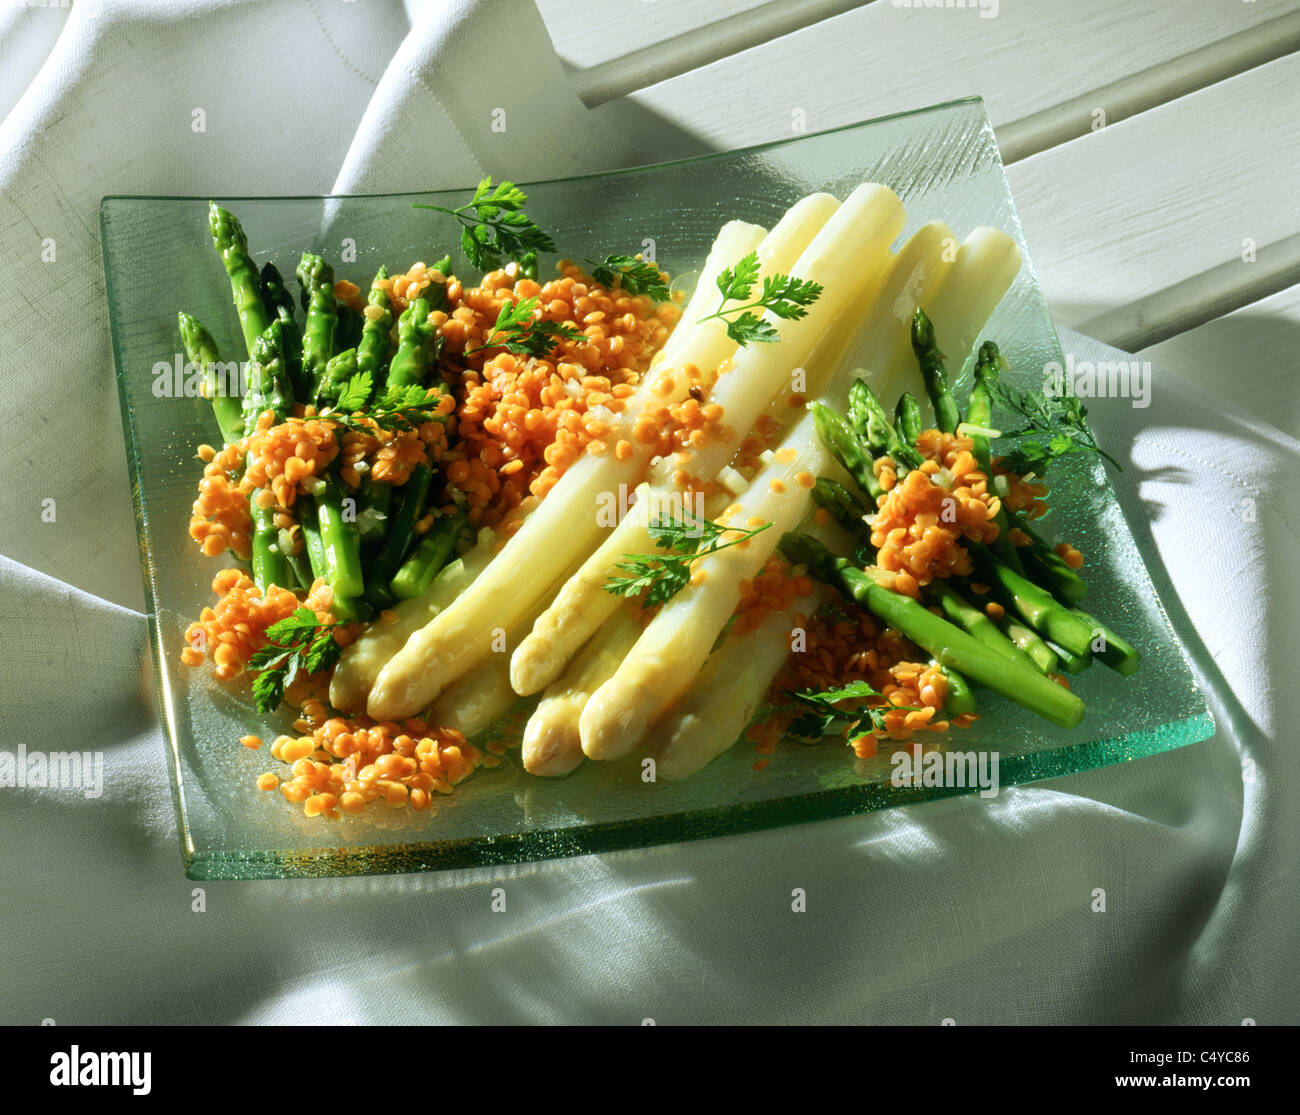 Asparagus salad with red lentils Stock Photo